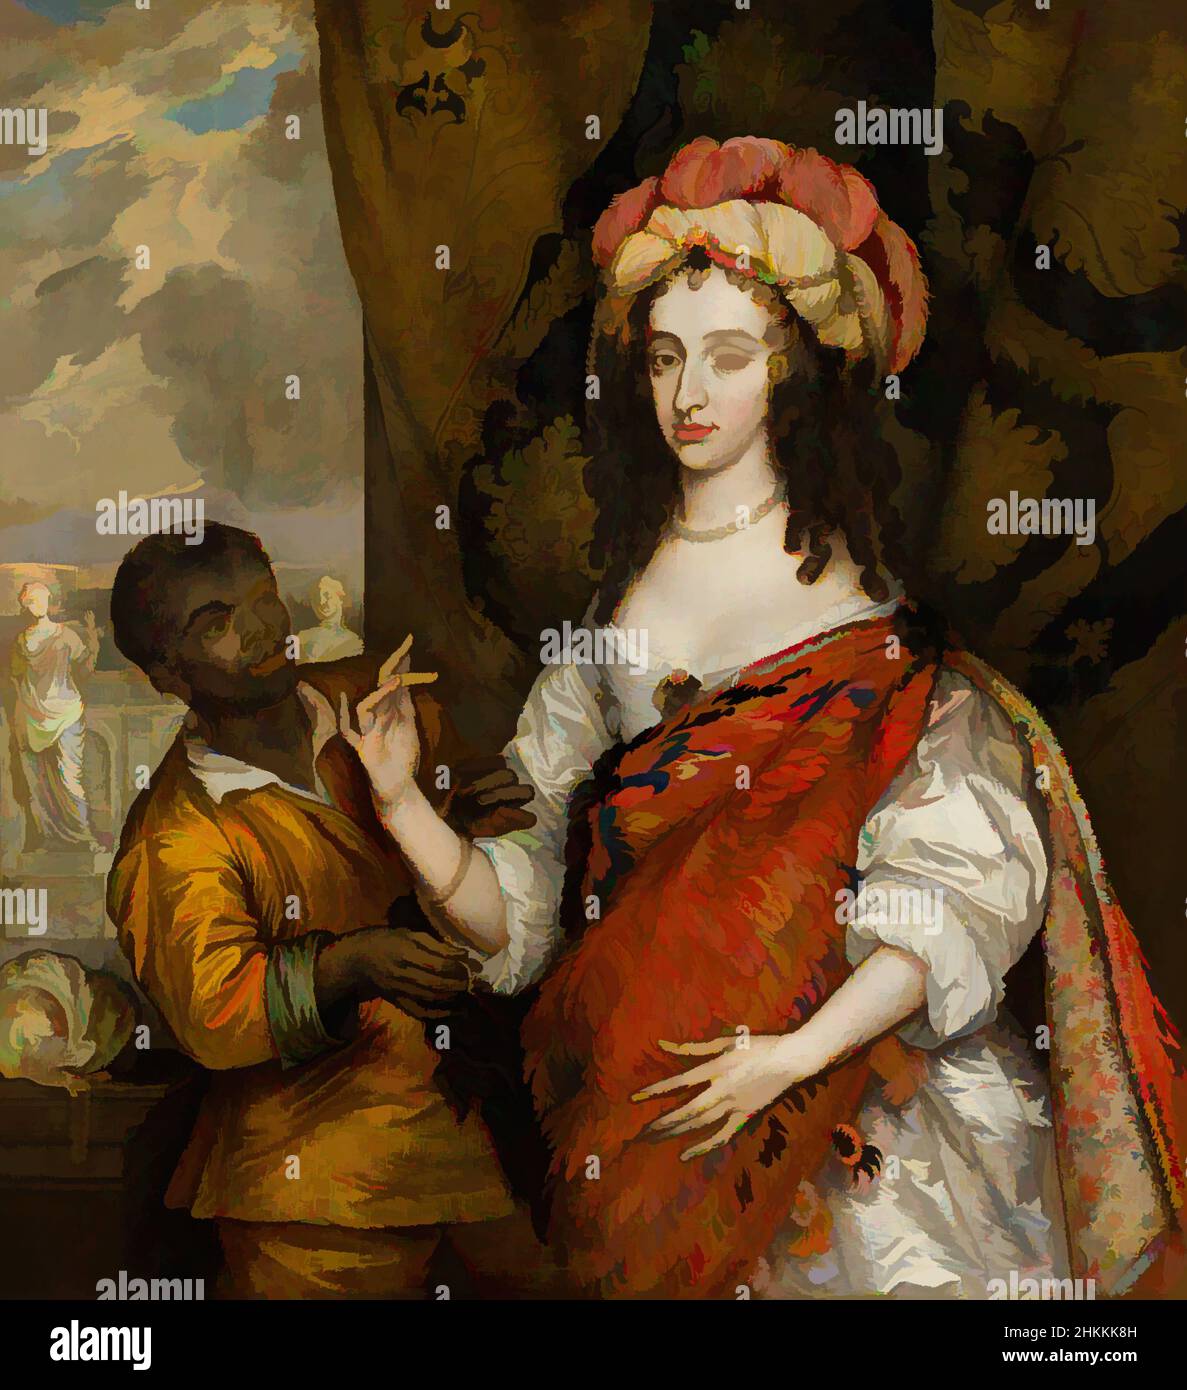 Art inspired by Posthumous portrait of Mary I Stuart 1631-1660 with a servant, Adriaen Hanneman, c. 1664, Classic works modernized by Artotop with a splash of modernity. Shapes, color and value, eye-catching visual impact on art. Emotions through freedom of artworks in a contemporary way. A timeless message pursuing a wildly creative new direction. Artists turning to the digital medium and creating the Artotop NFT Stock Photo